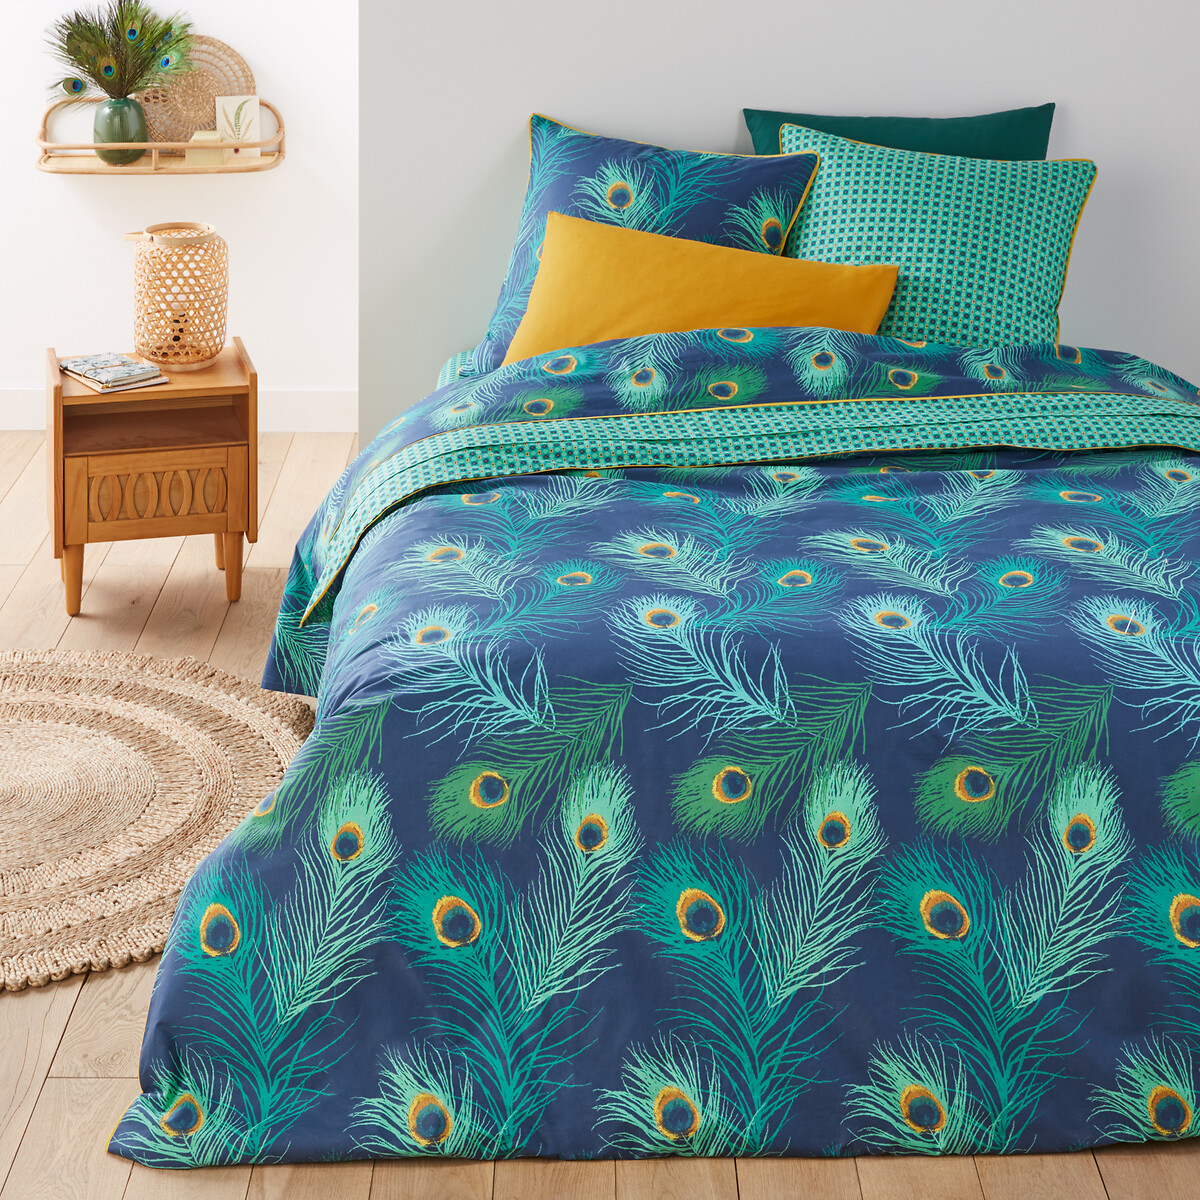 Luxuries FEATHER Printed Reversable Duvet Cover+Pillow Case Bedding Set All Size 